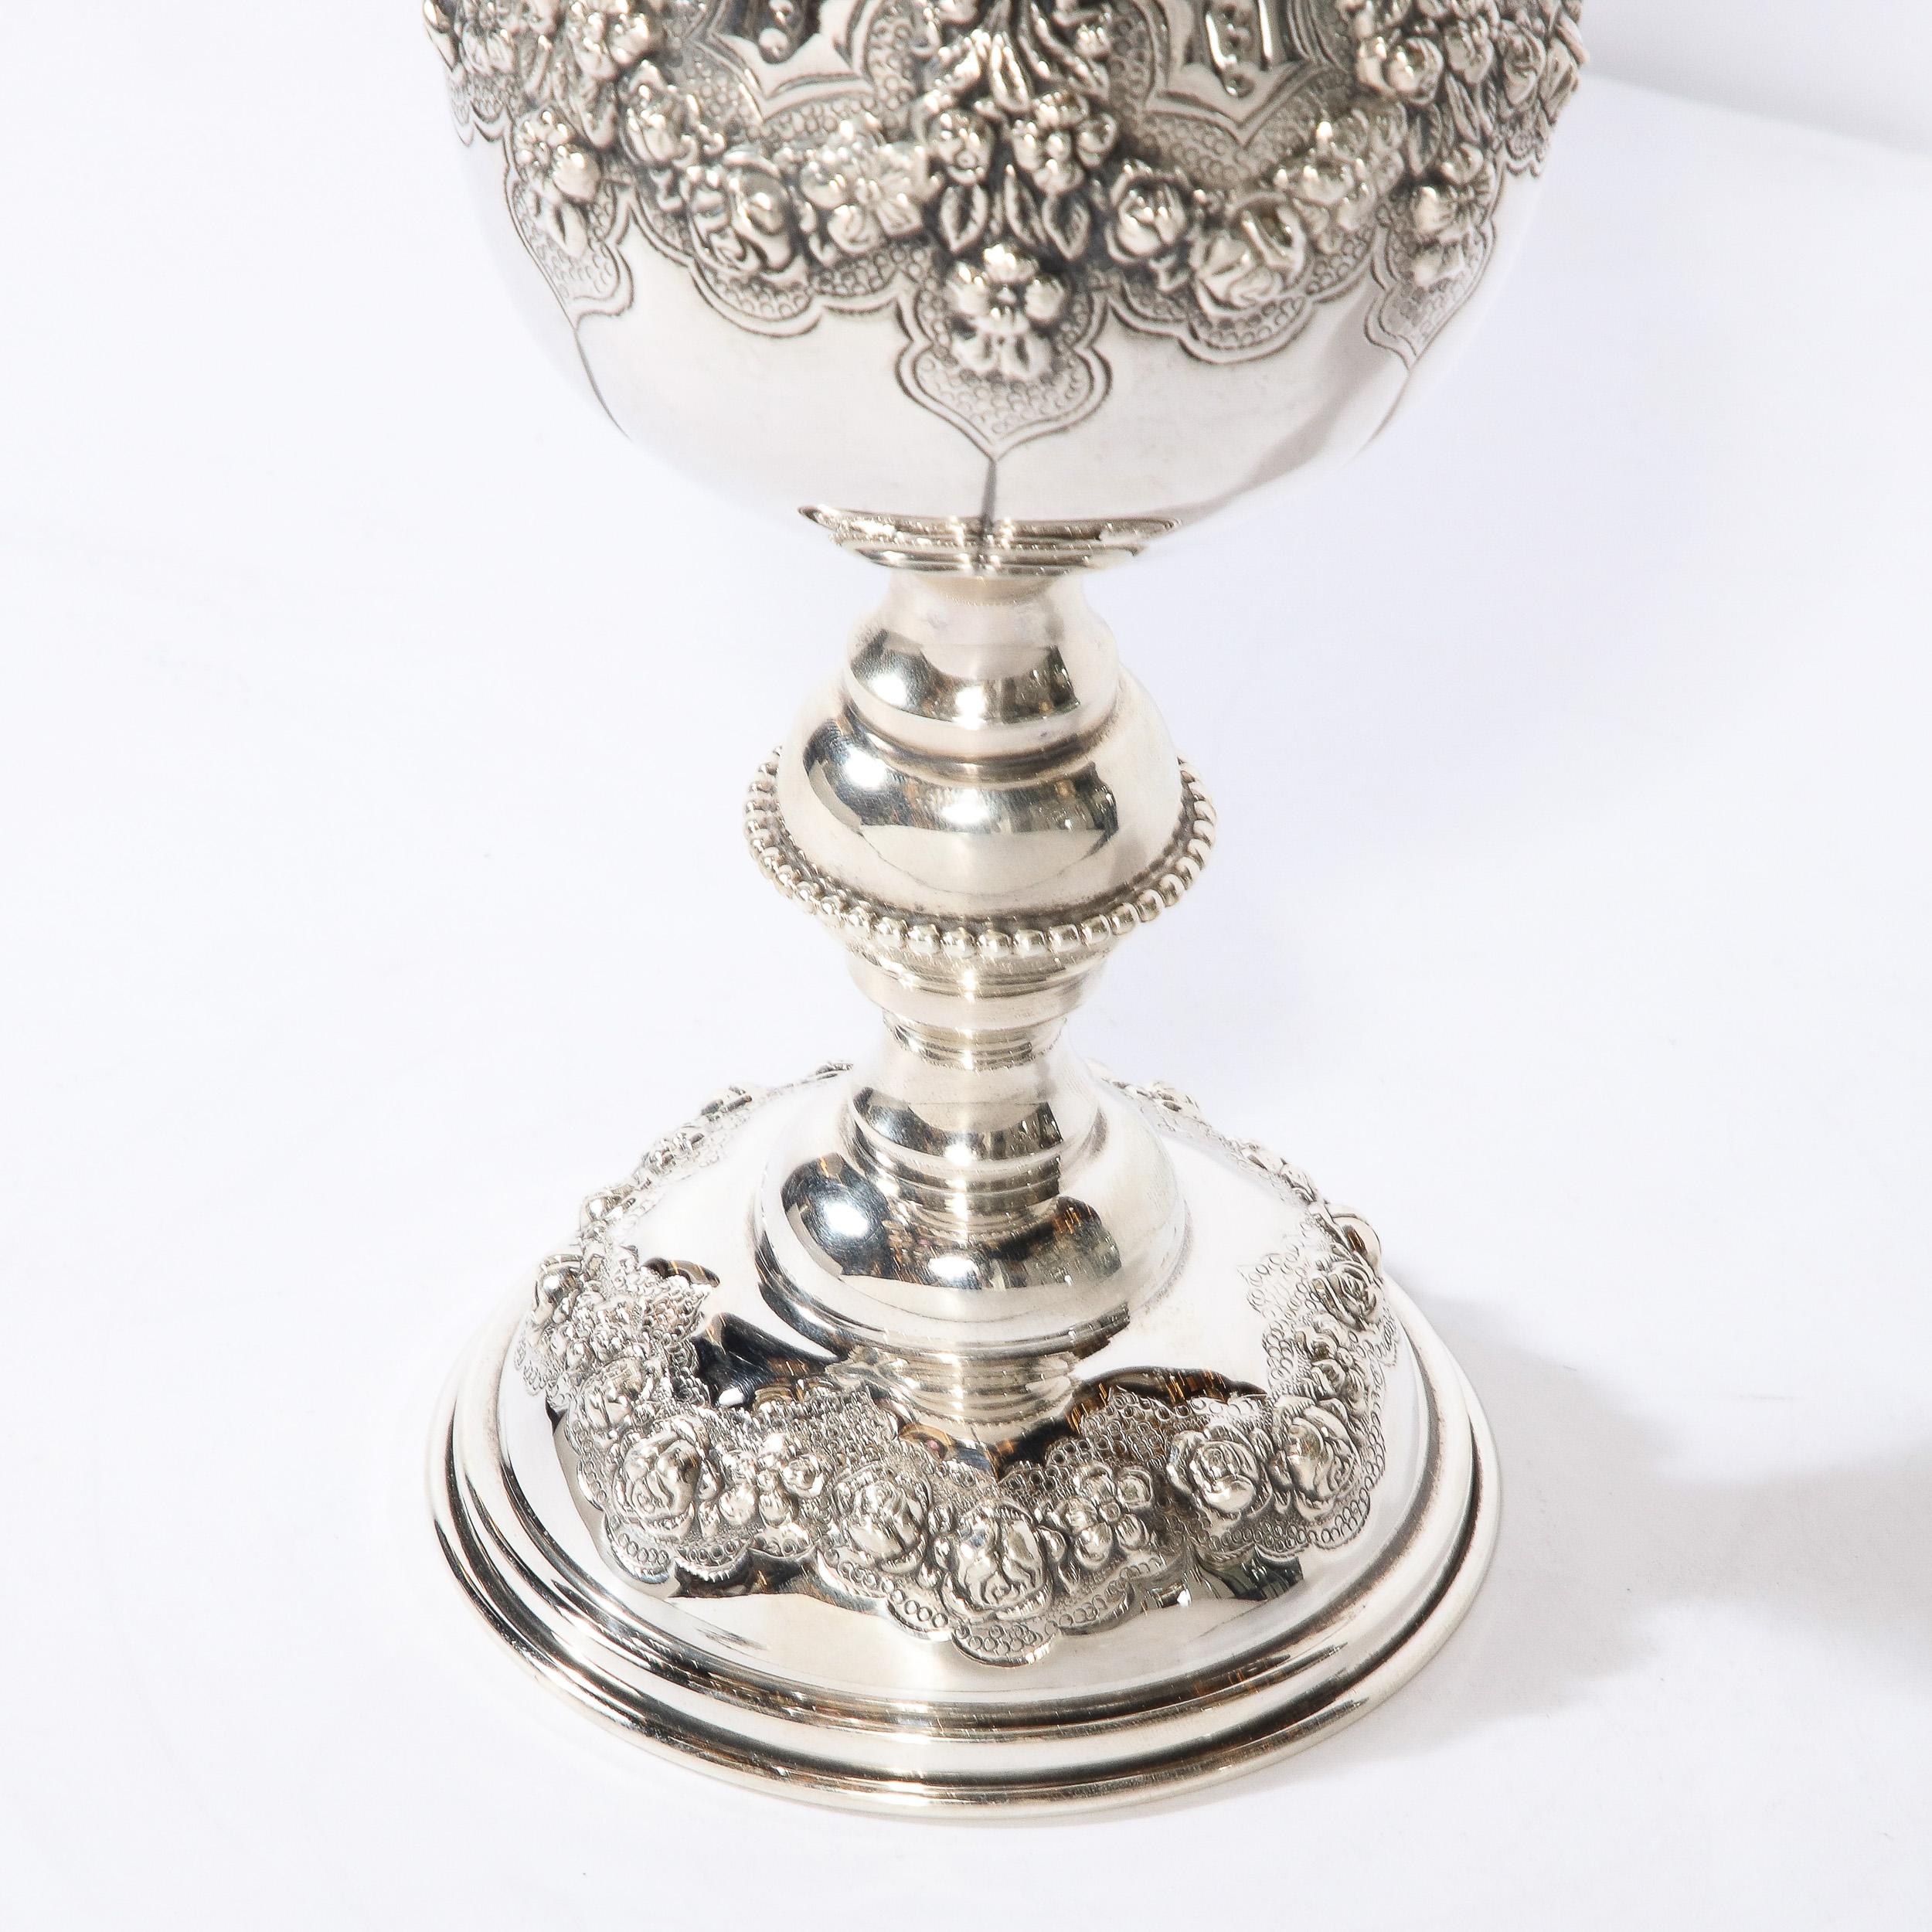 20th Century Monumental Sterling  Kiddish Goblet with Repousse Designs  by Hadad Brothers For Sale